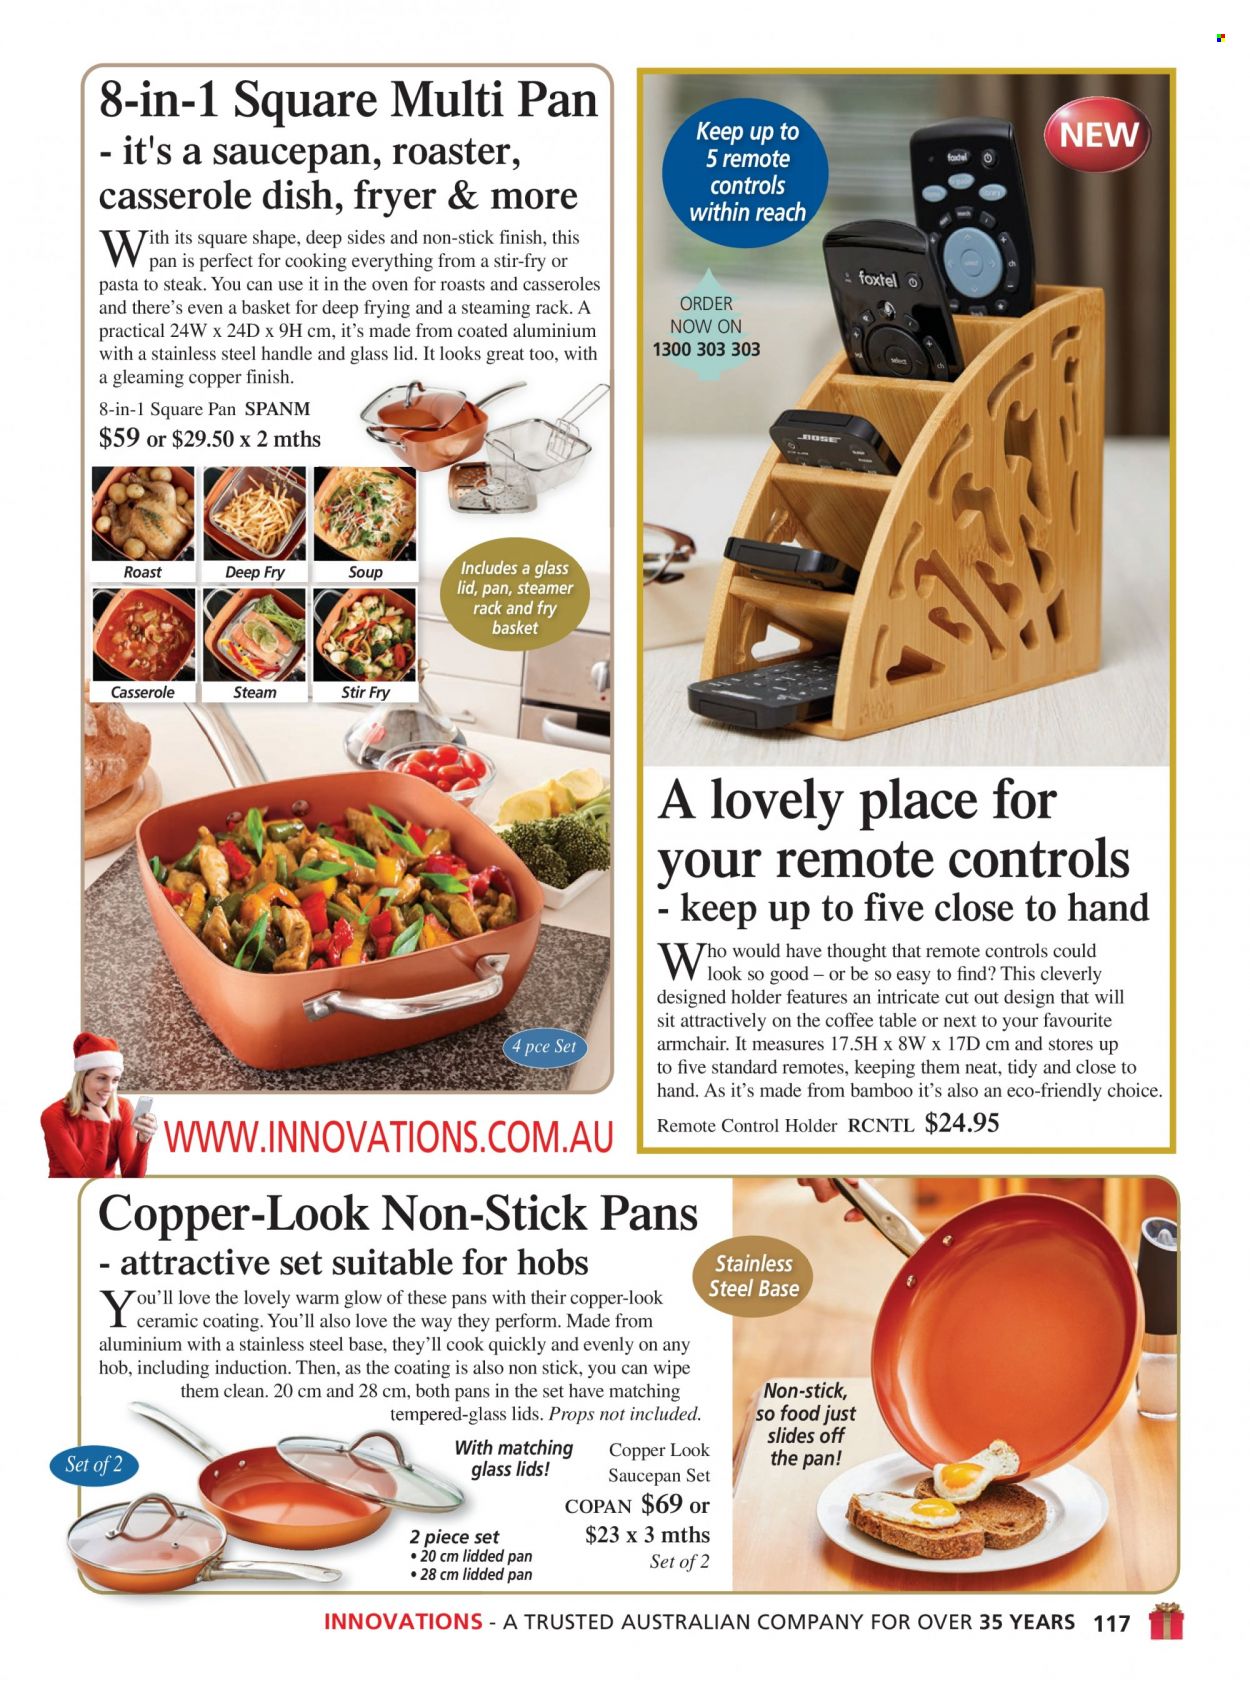 thumbnail - Innovations Catalogue - Sales products - basket, lid, pan, casserole, saucepan, soup, remote control holder, roaster. Page 117.